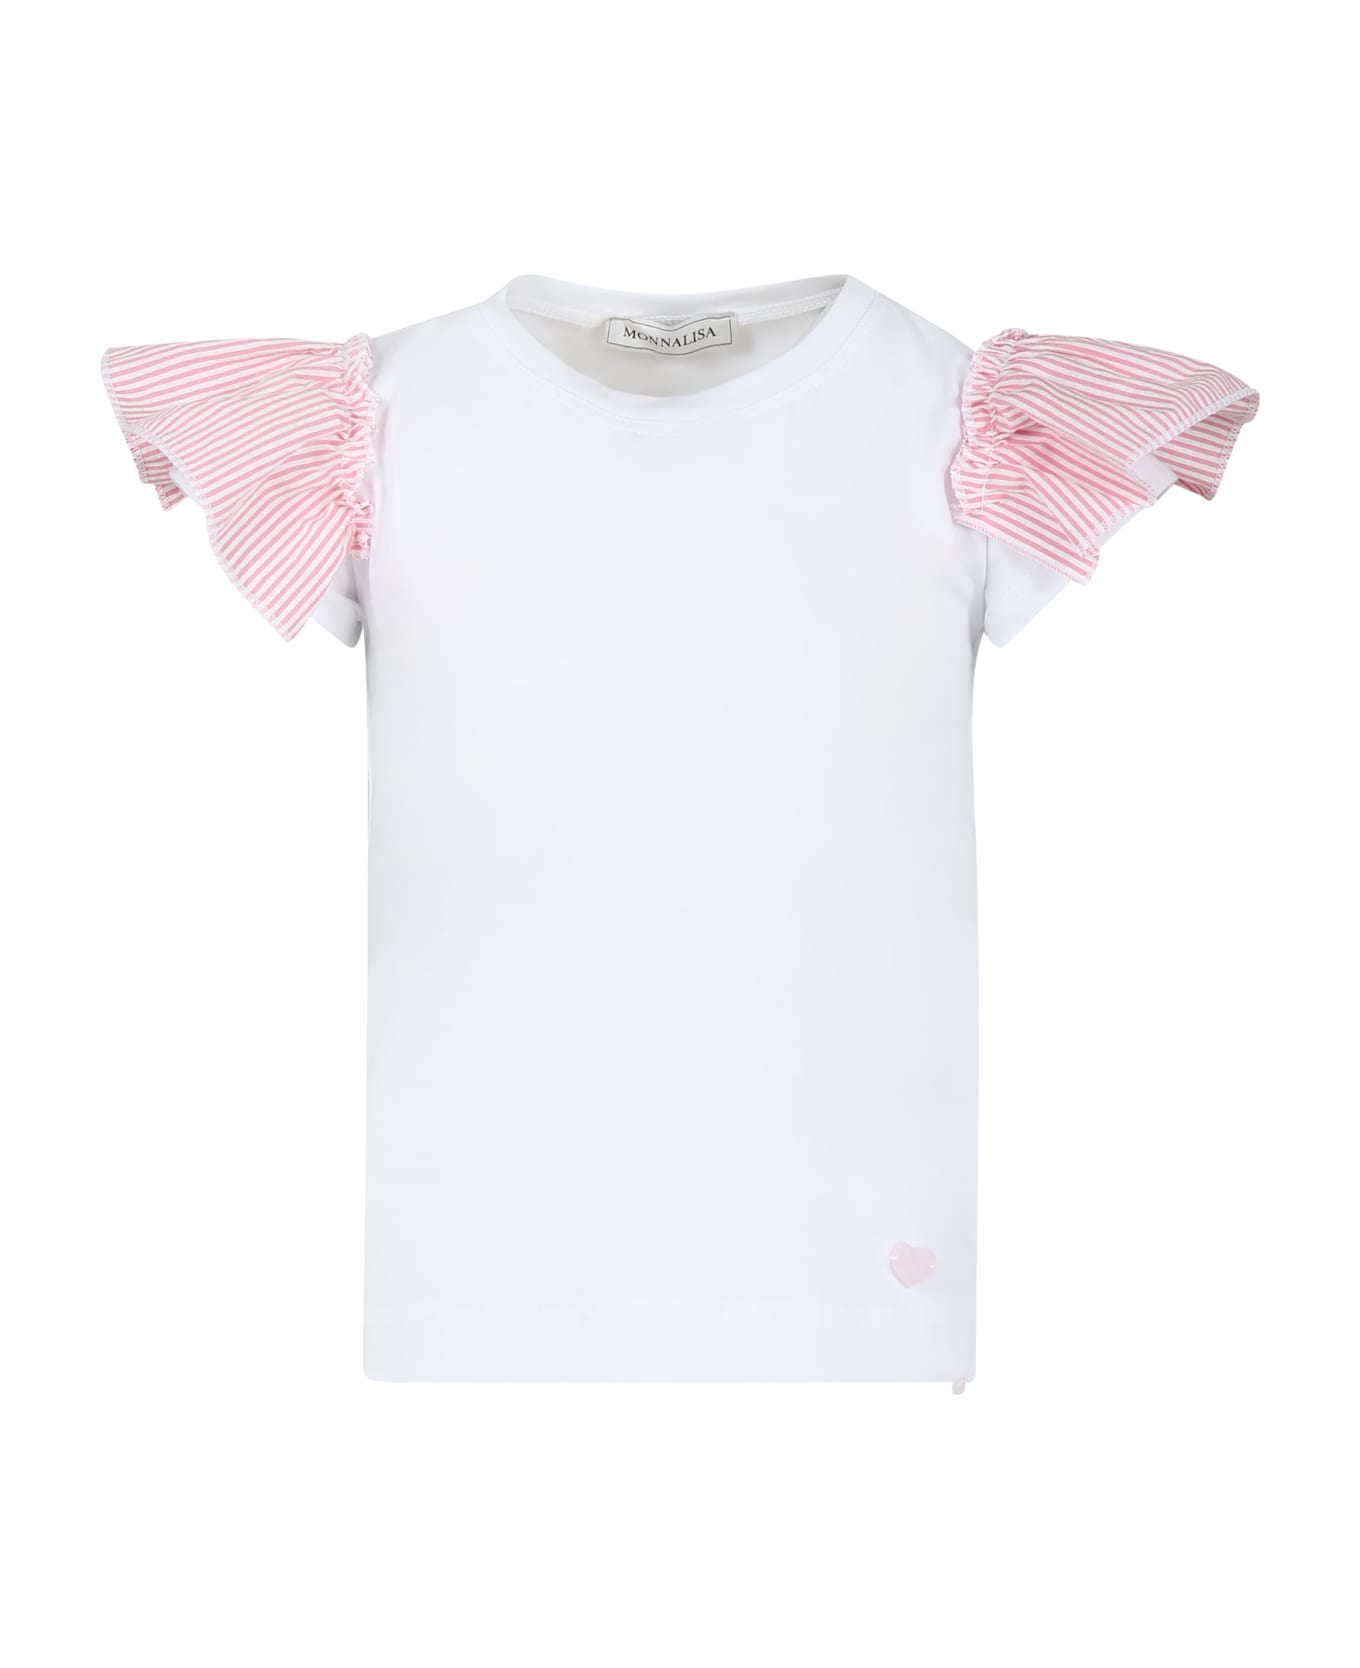 Monnalisa White T-shirt For Girl With Pink Heart - White